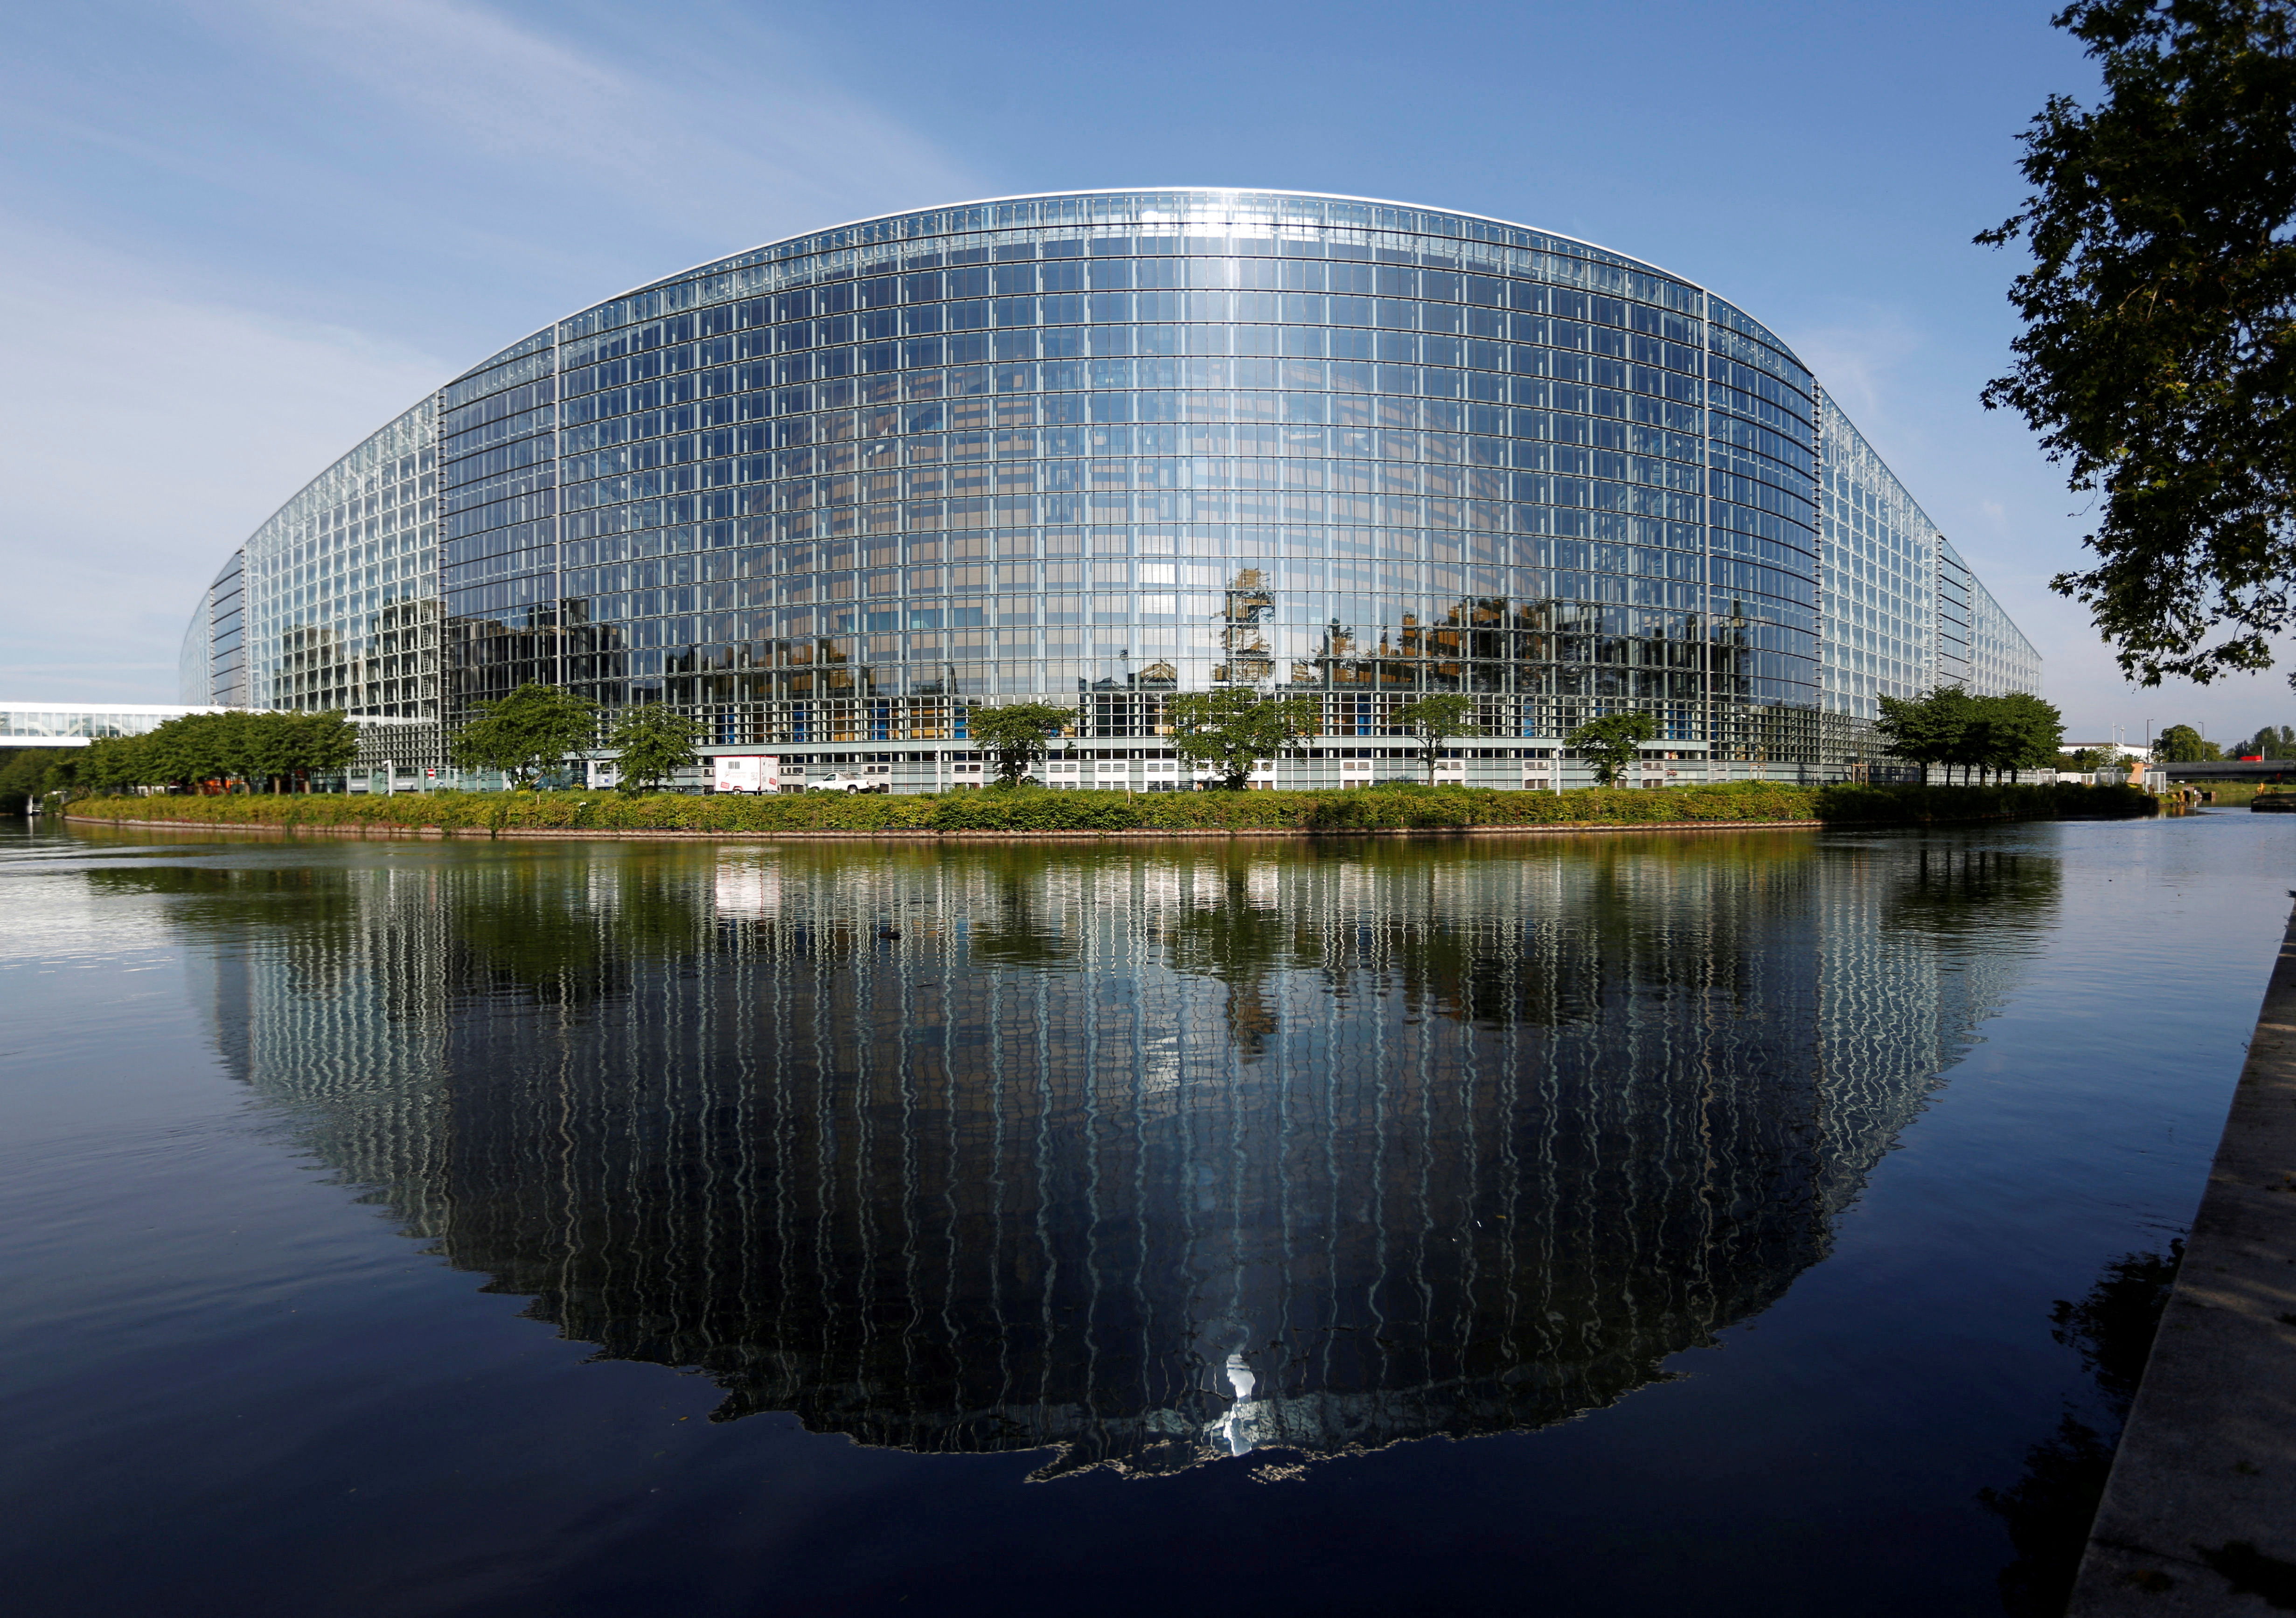 The building of the European Parliament is seen in Strasbourg